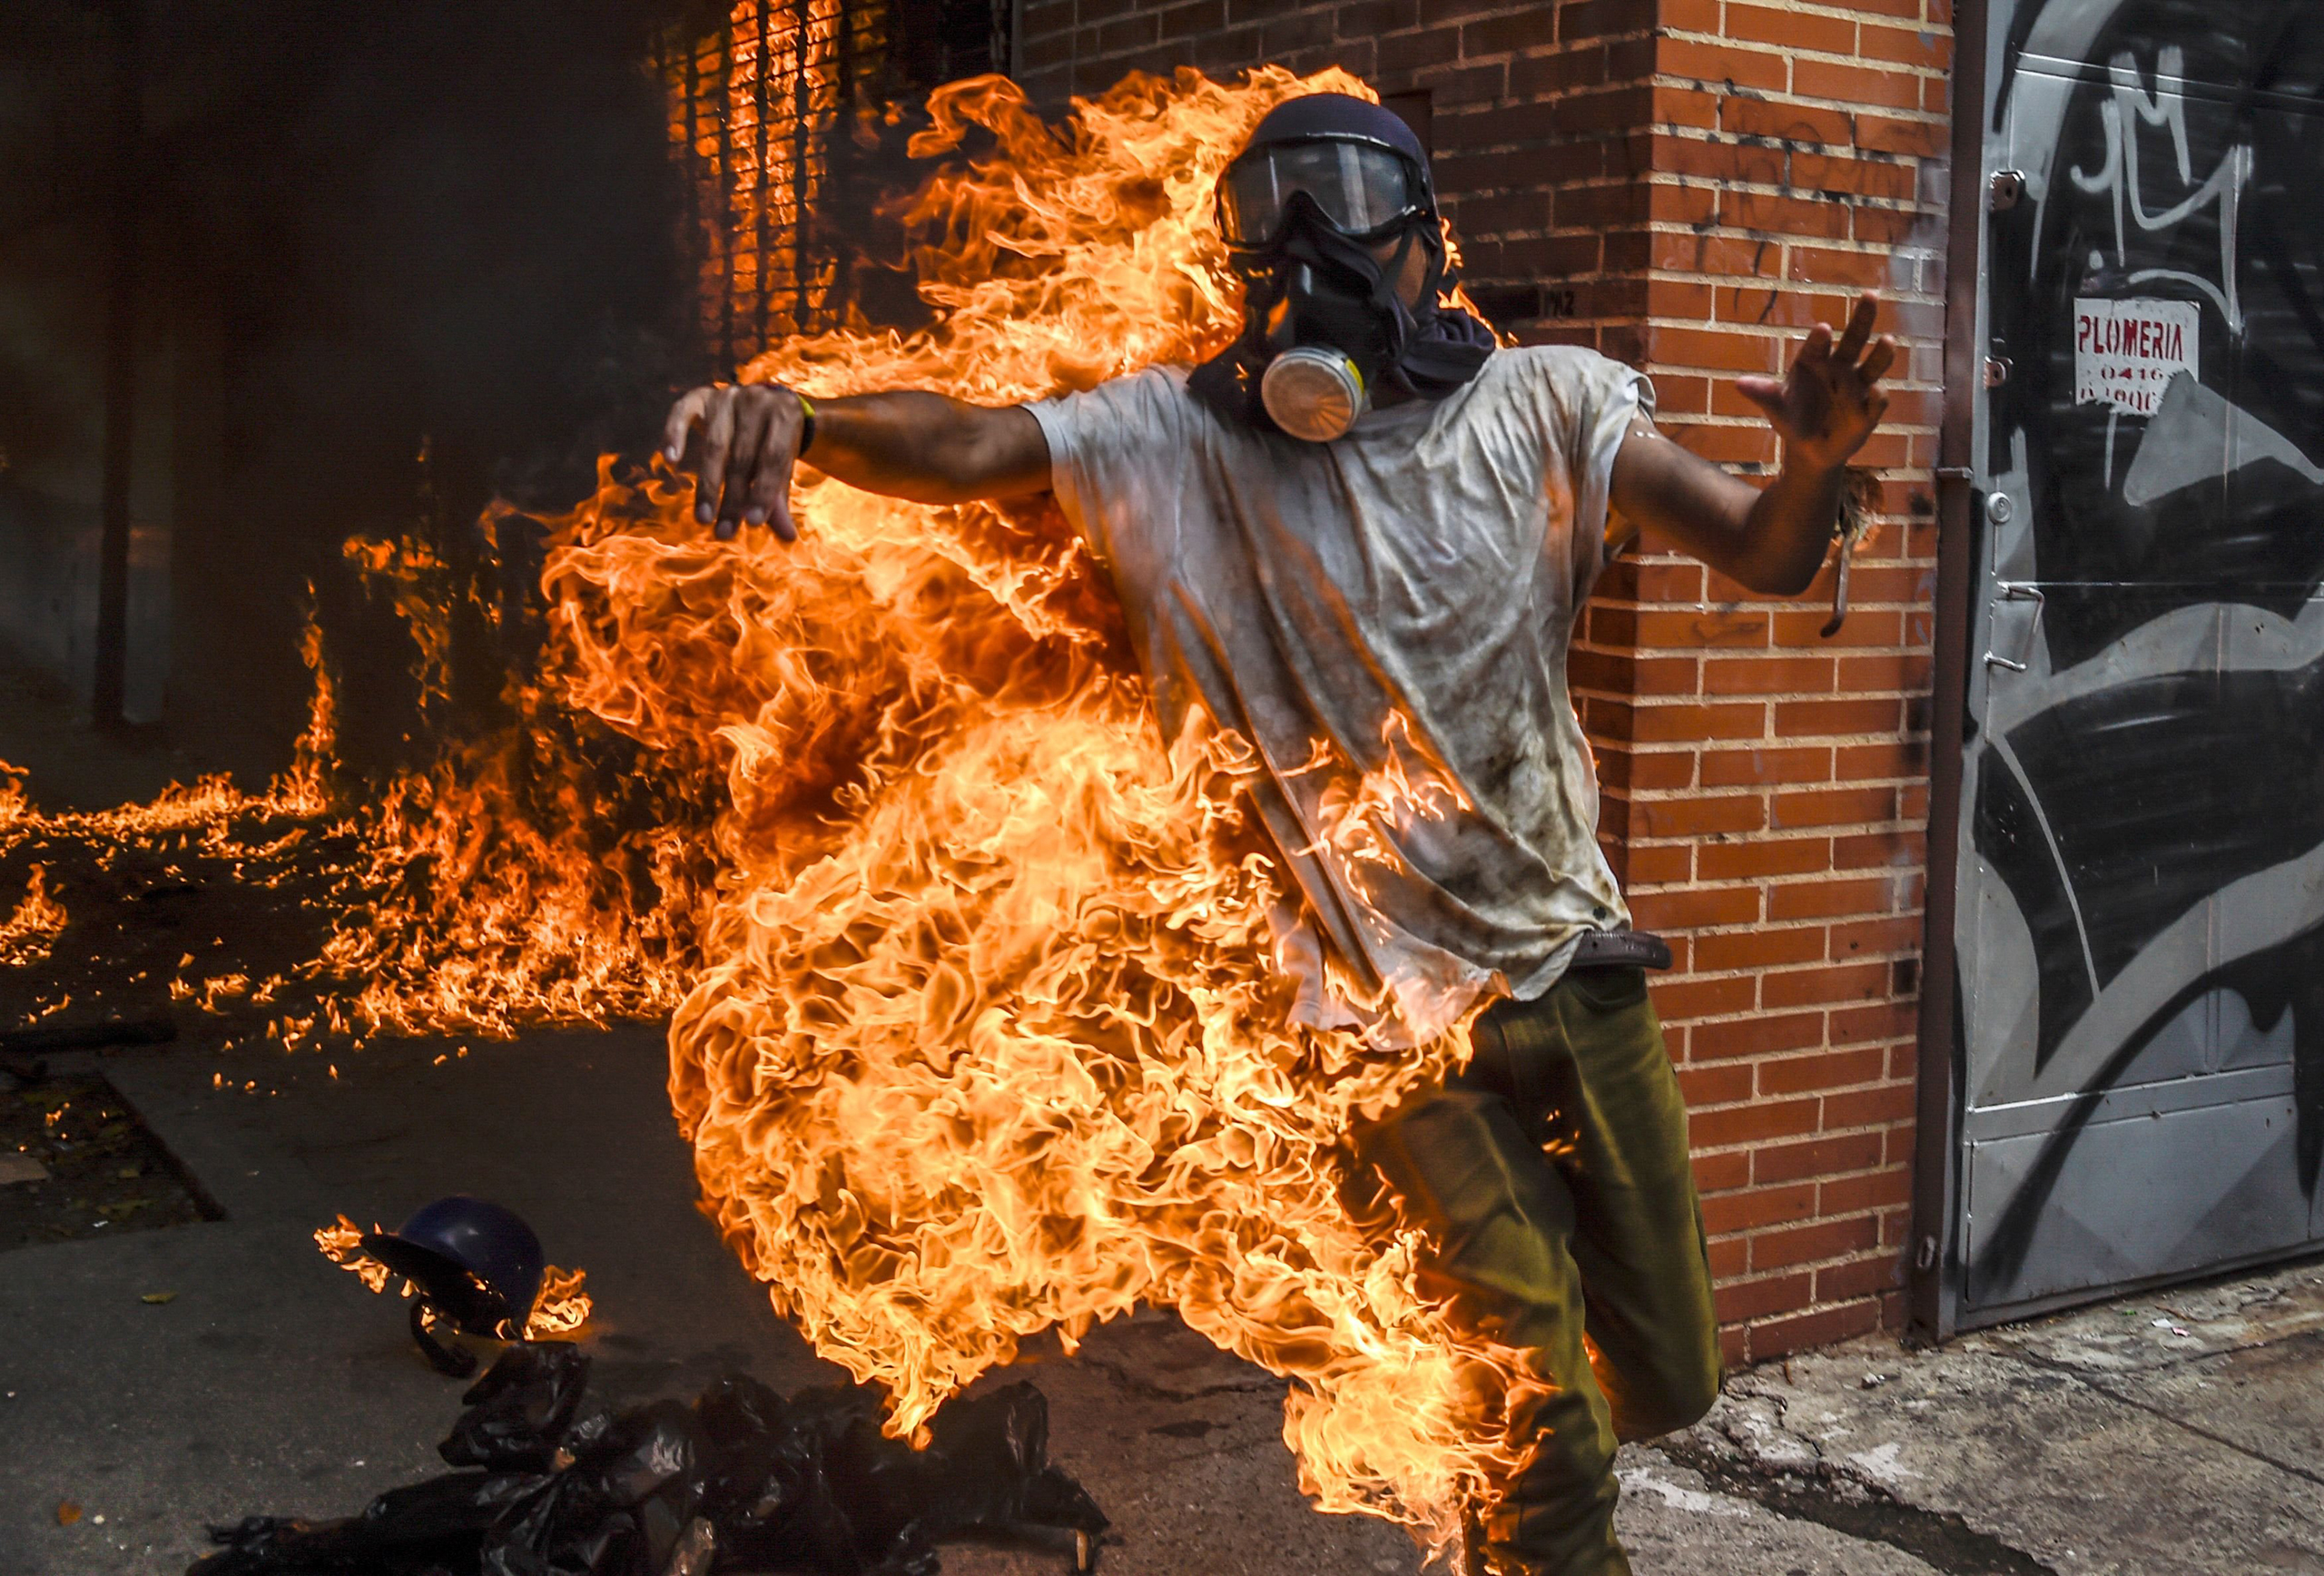 A demonstrator set ablaze during an anti-Maduro protest reaches out in Caracas on May 3, 2017.